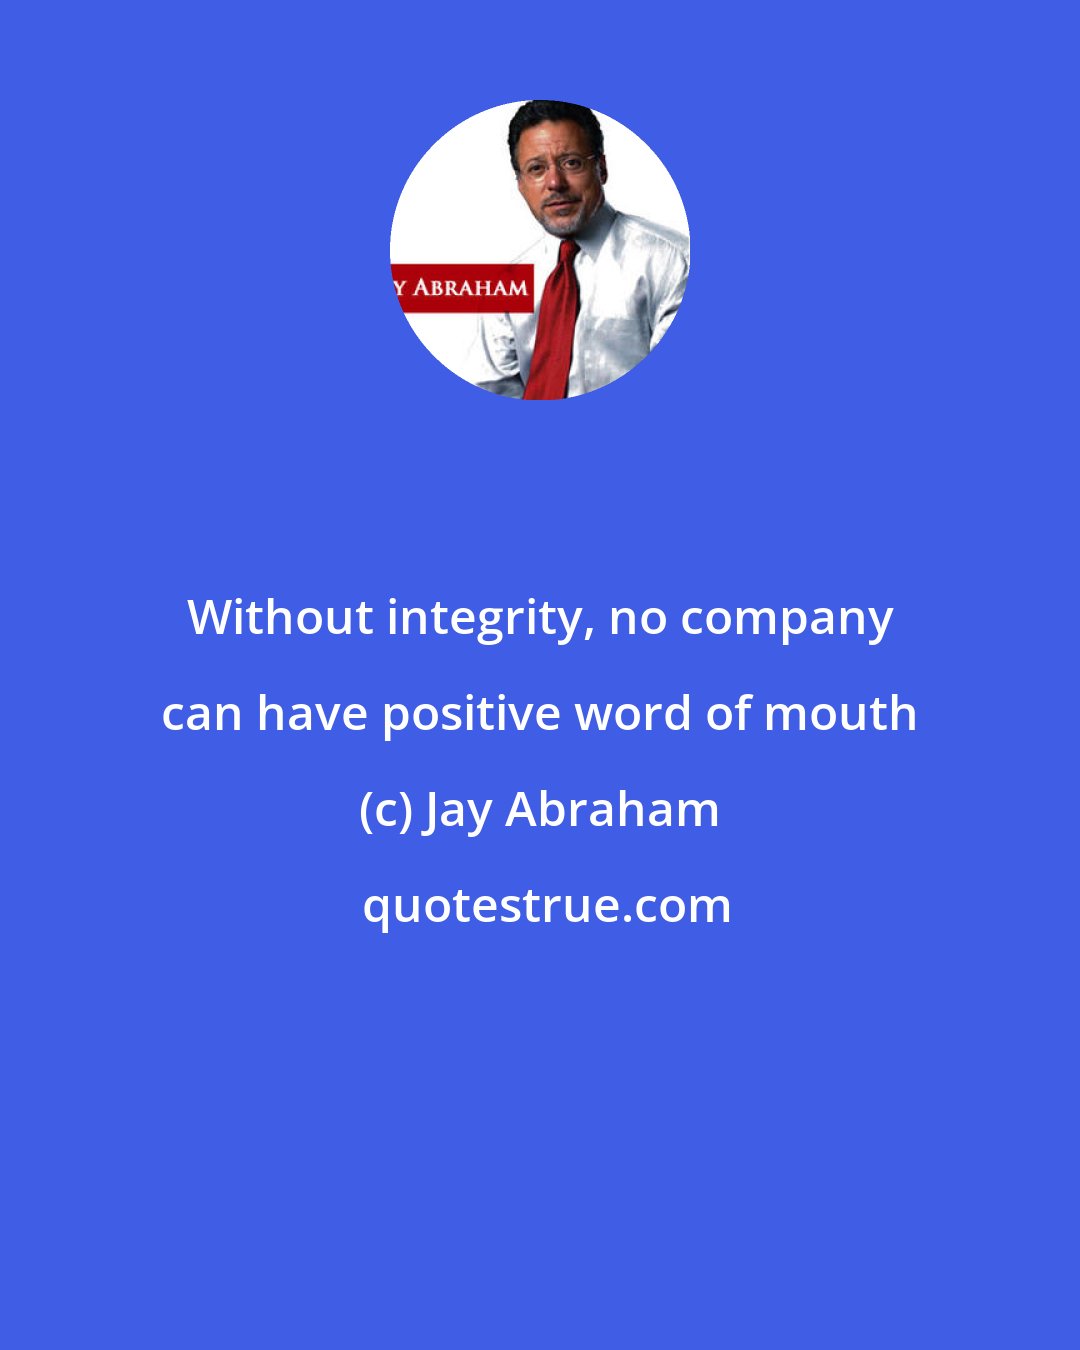 Jay Abraham: Without integrity, no company can have positive word of mouth